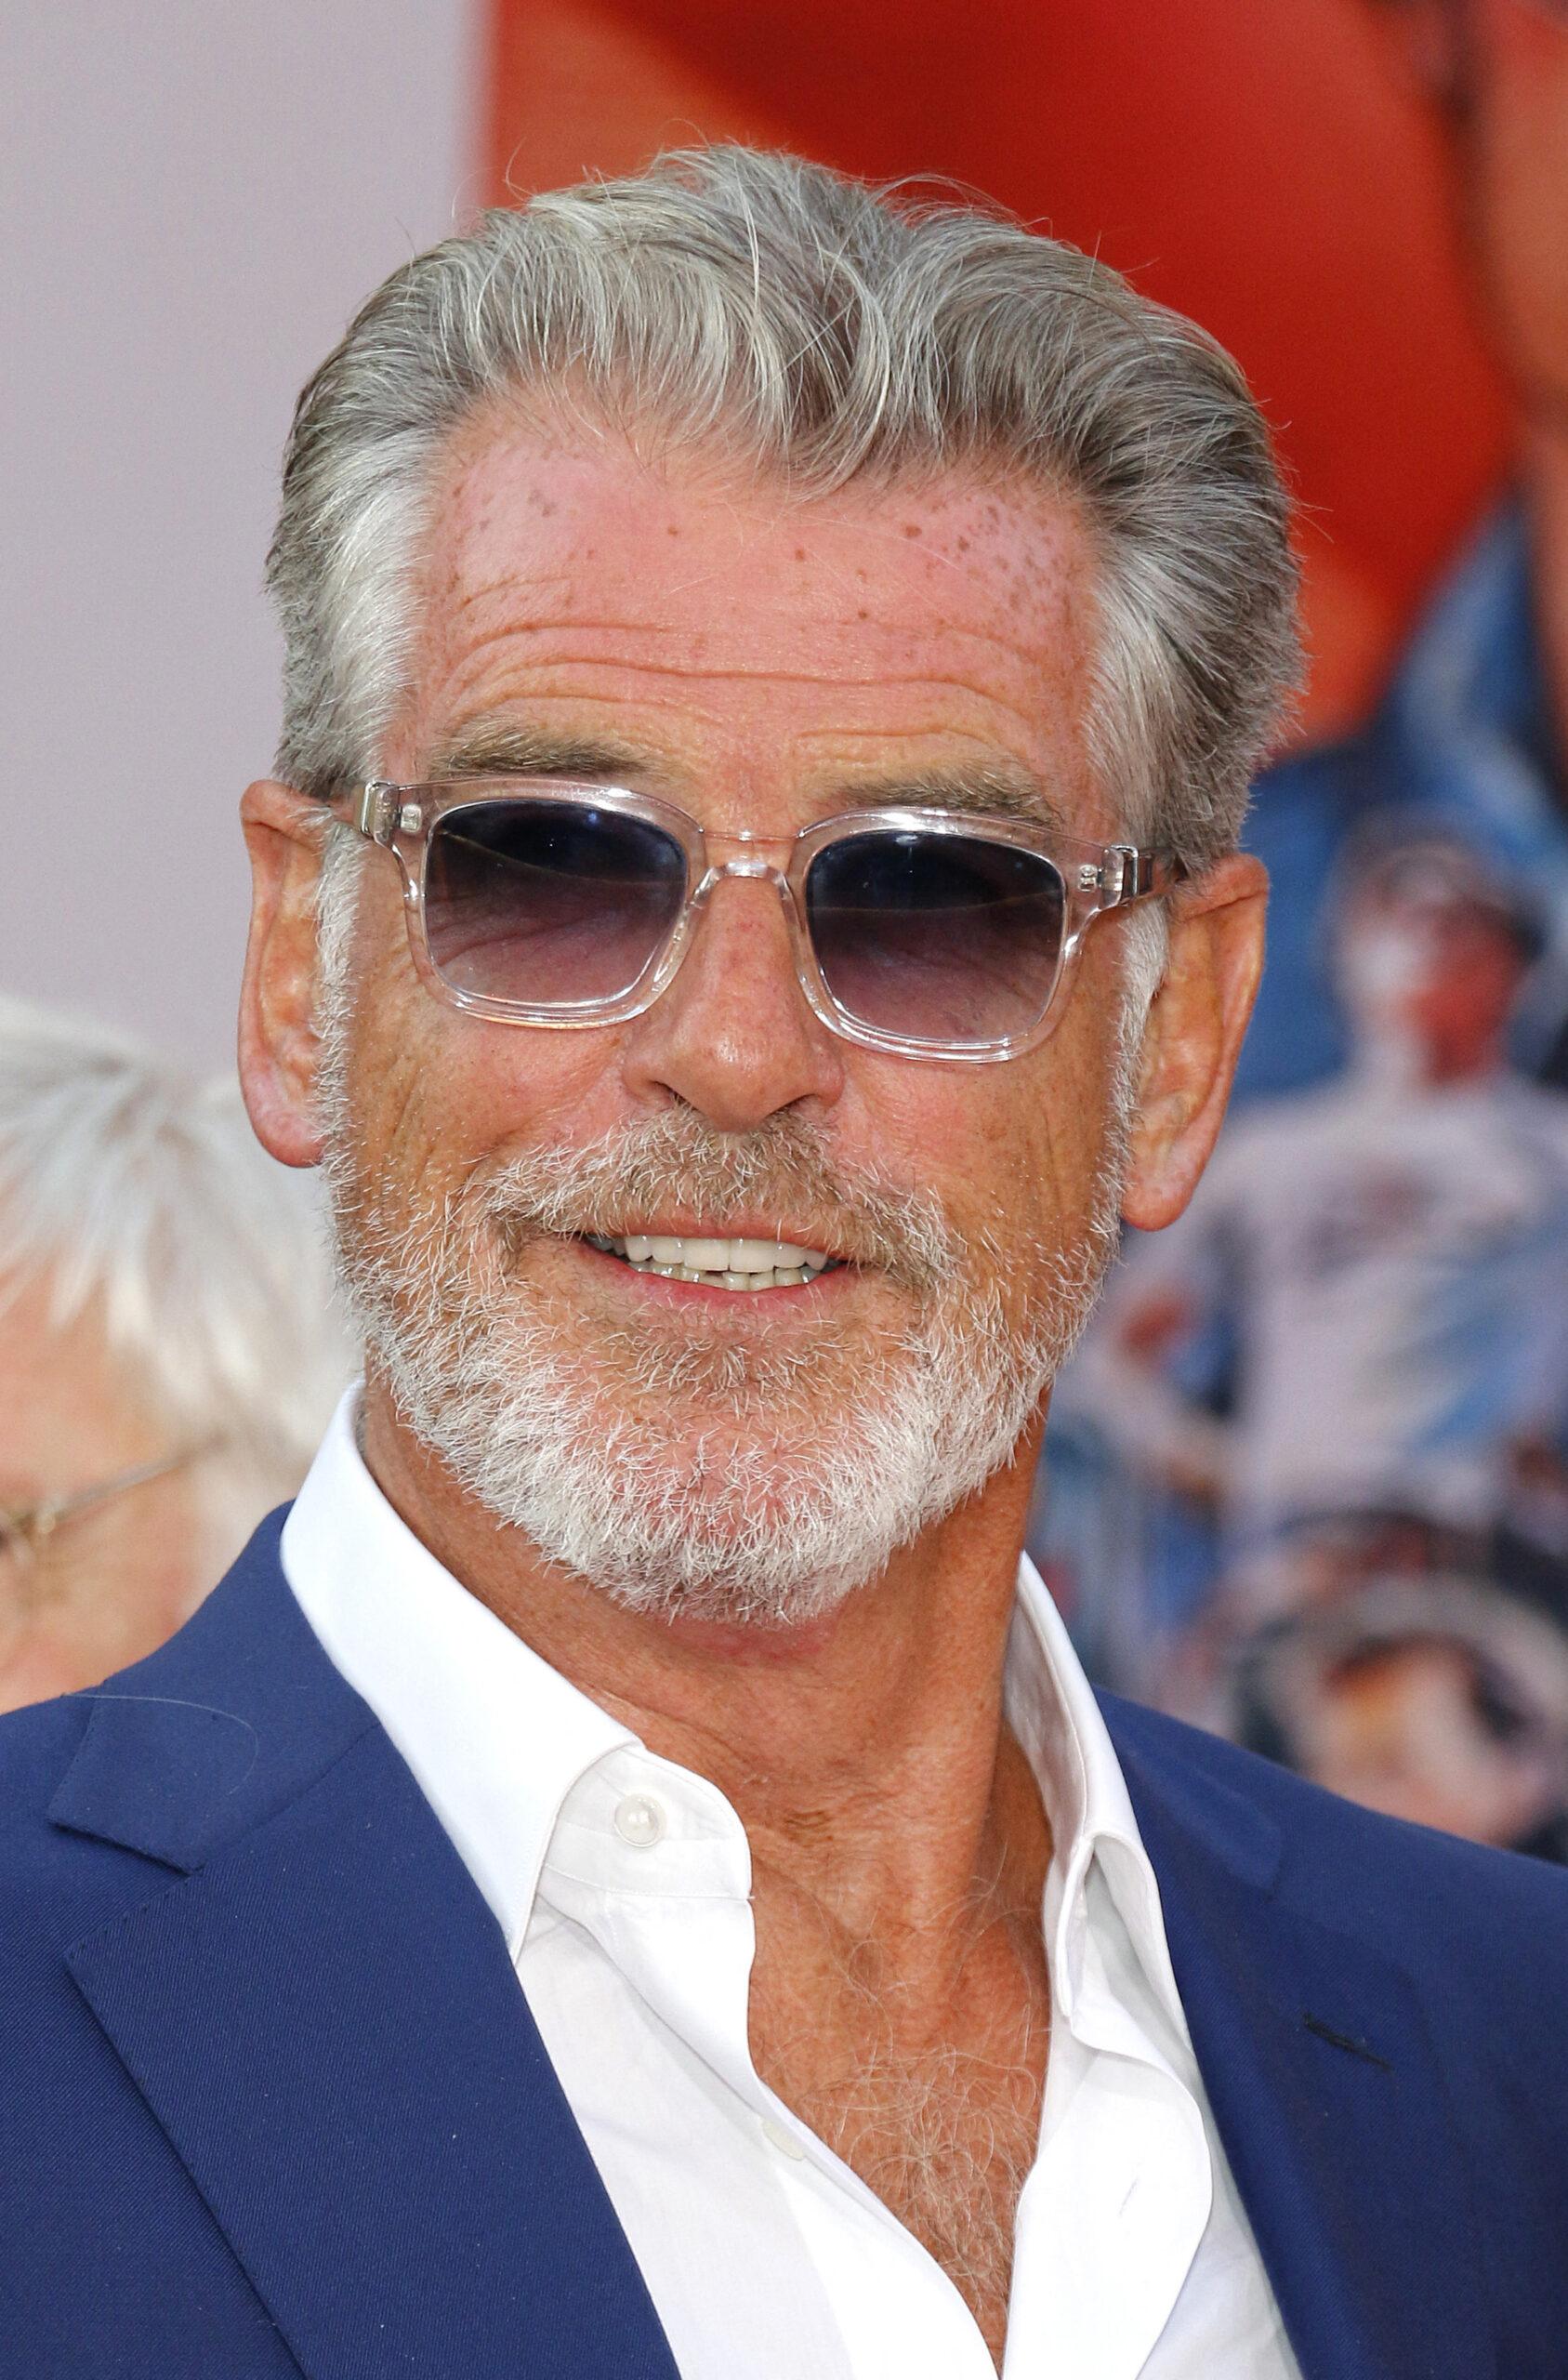 Pierce Brosnan at Los Angeles premiere of 'Once Upon a Time In Hollywood'